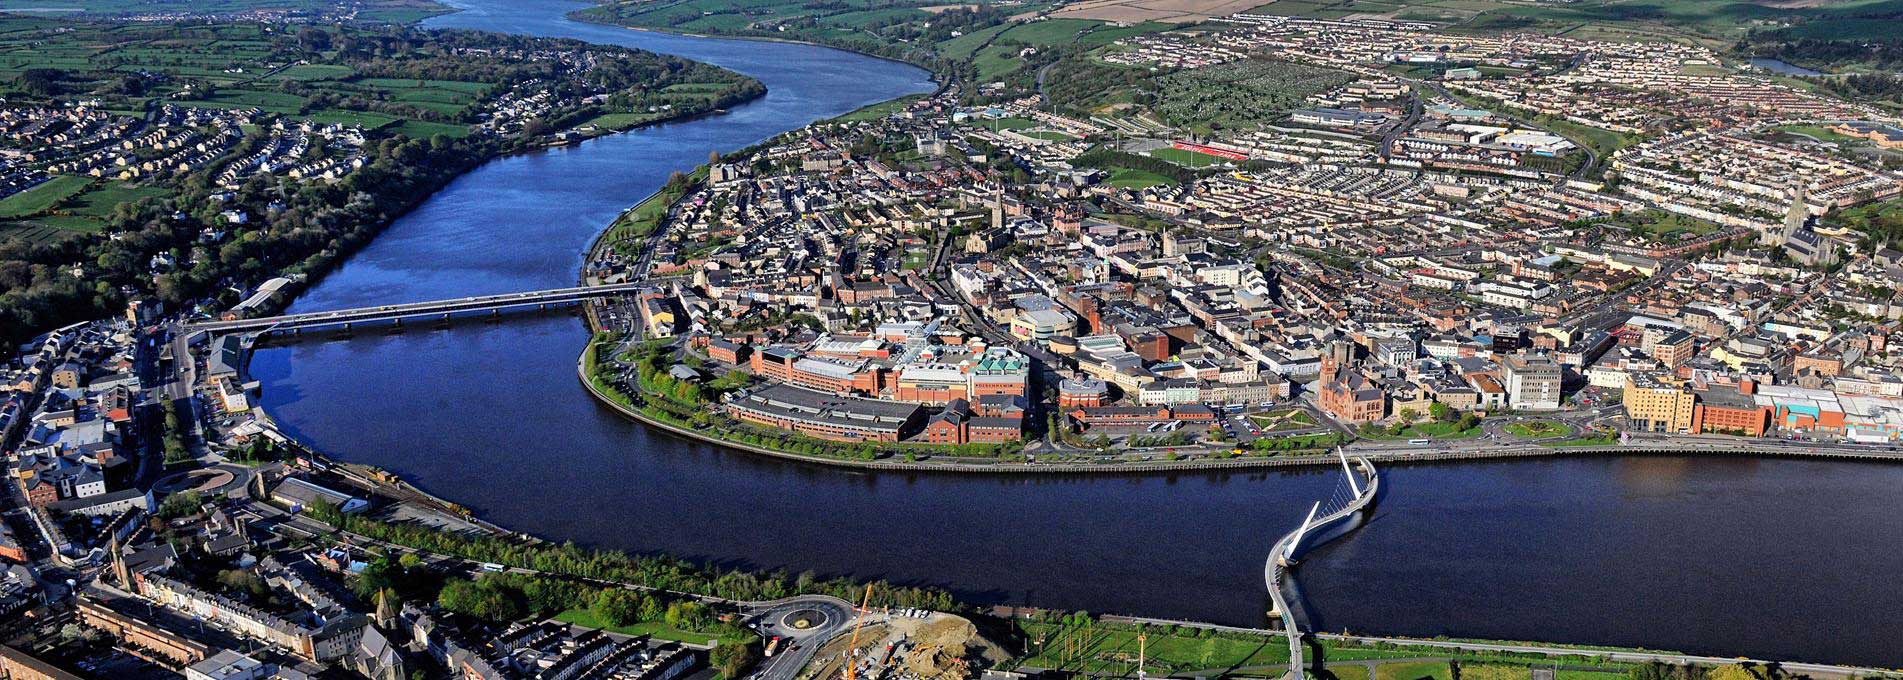 The River Foyle